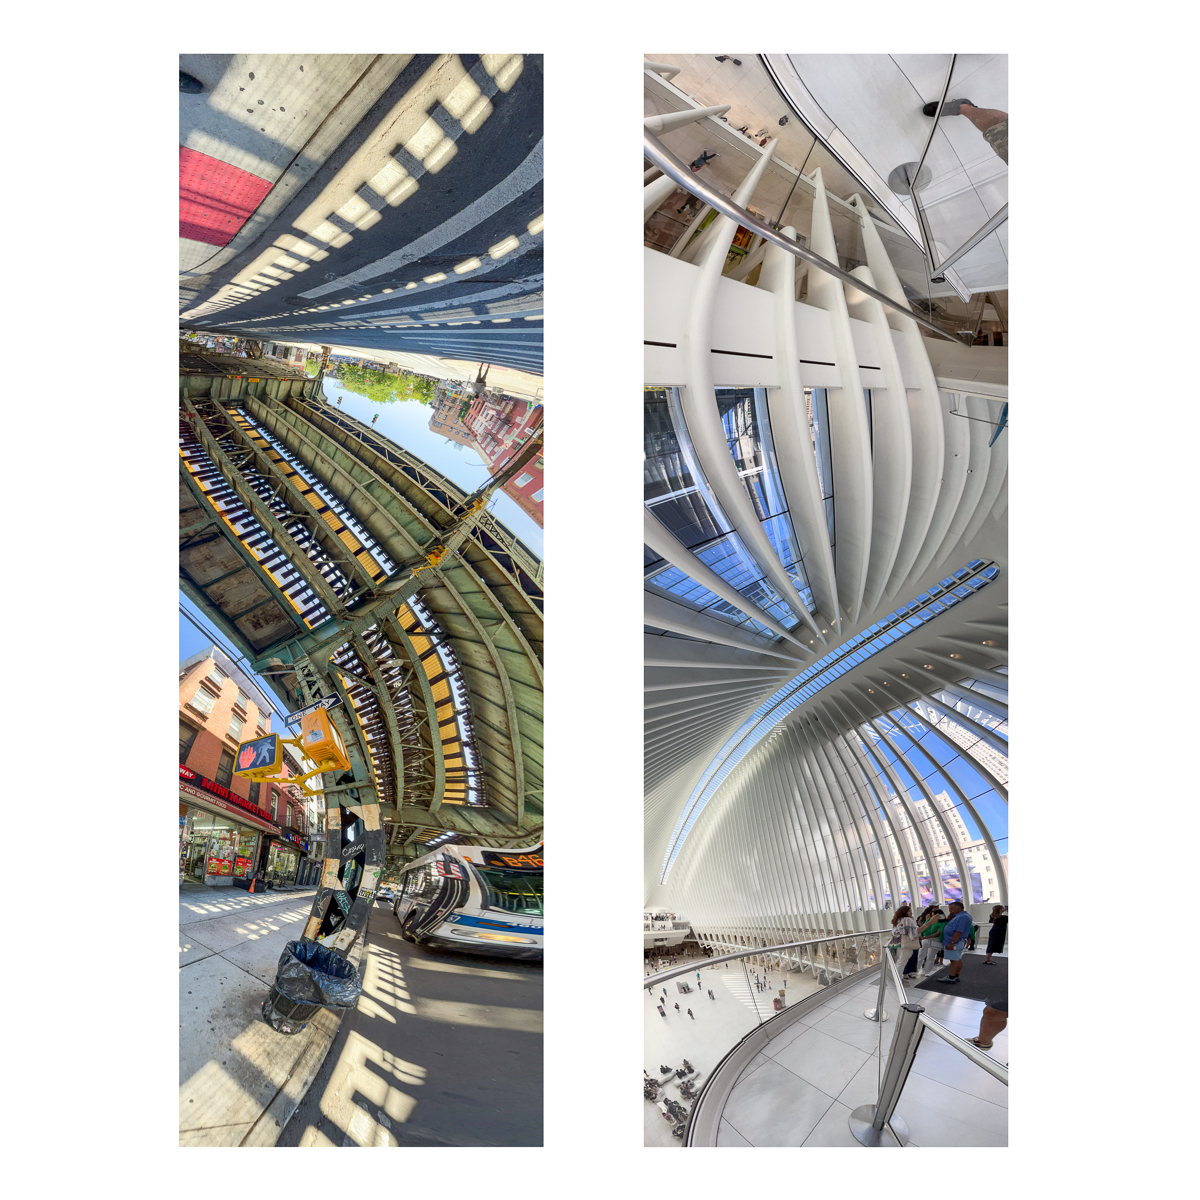 Upstream/Downstream - 270° Phases<br>the Occulus and Broadway Elevated, Brooklyn - 2022